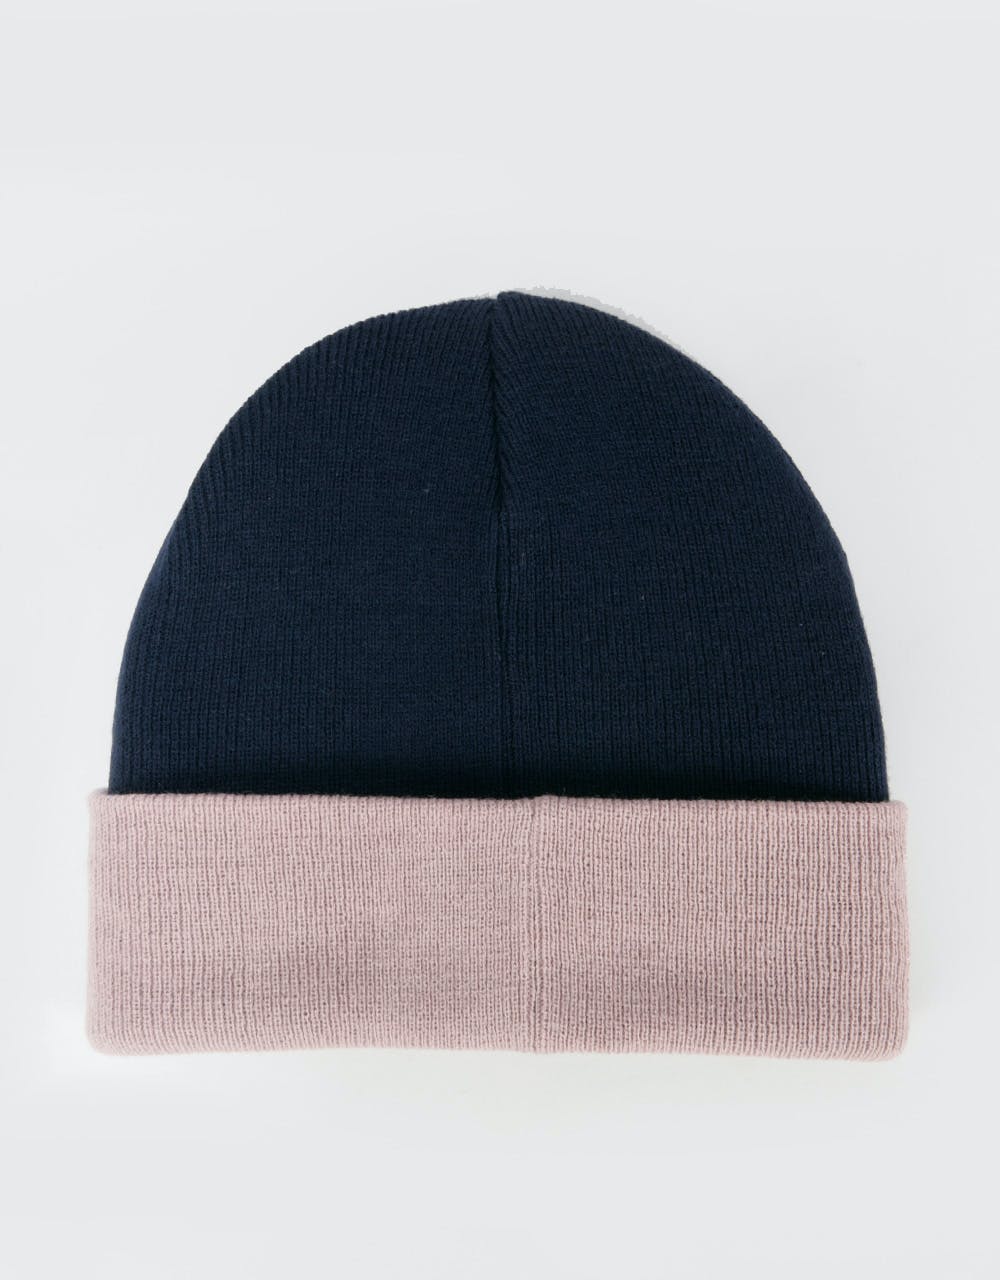 Herschel Supply Co. Rosewell Beanie - Peacoat/Ash Rose